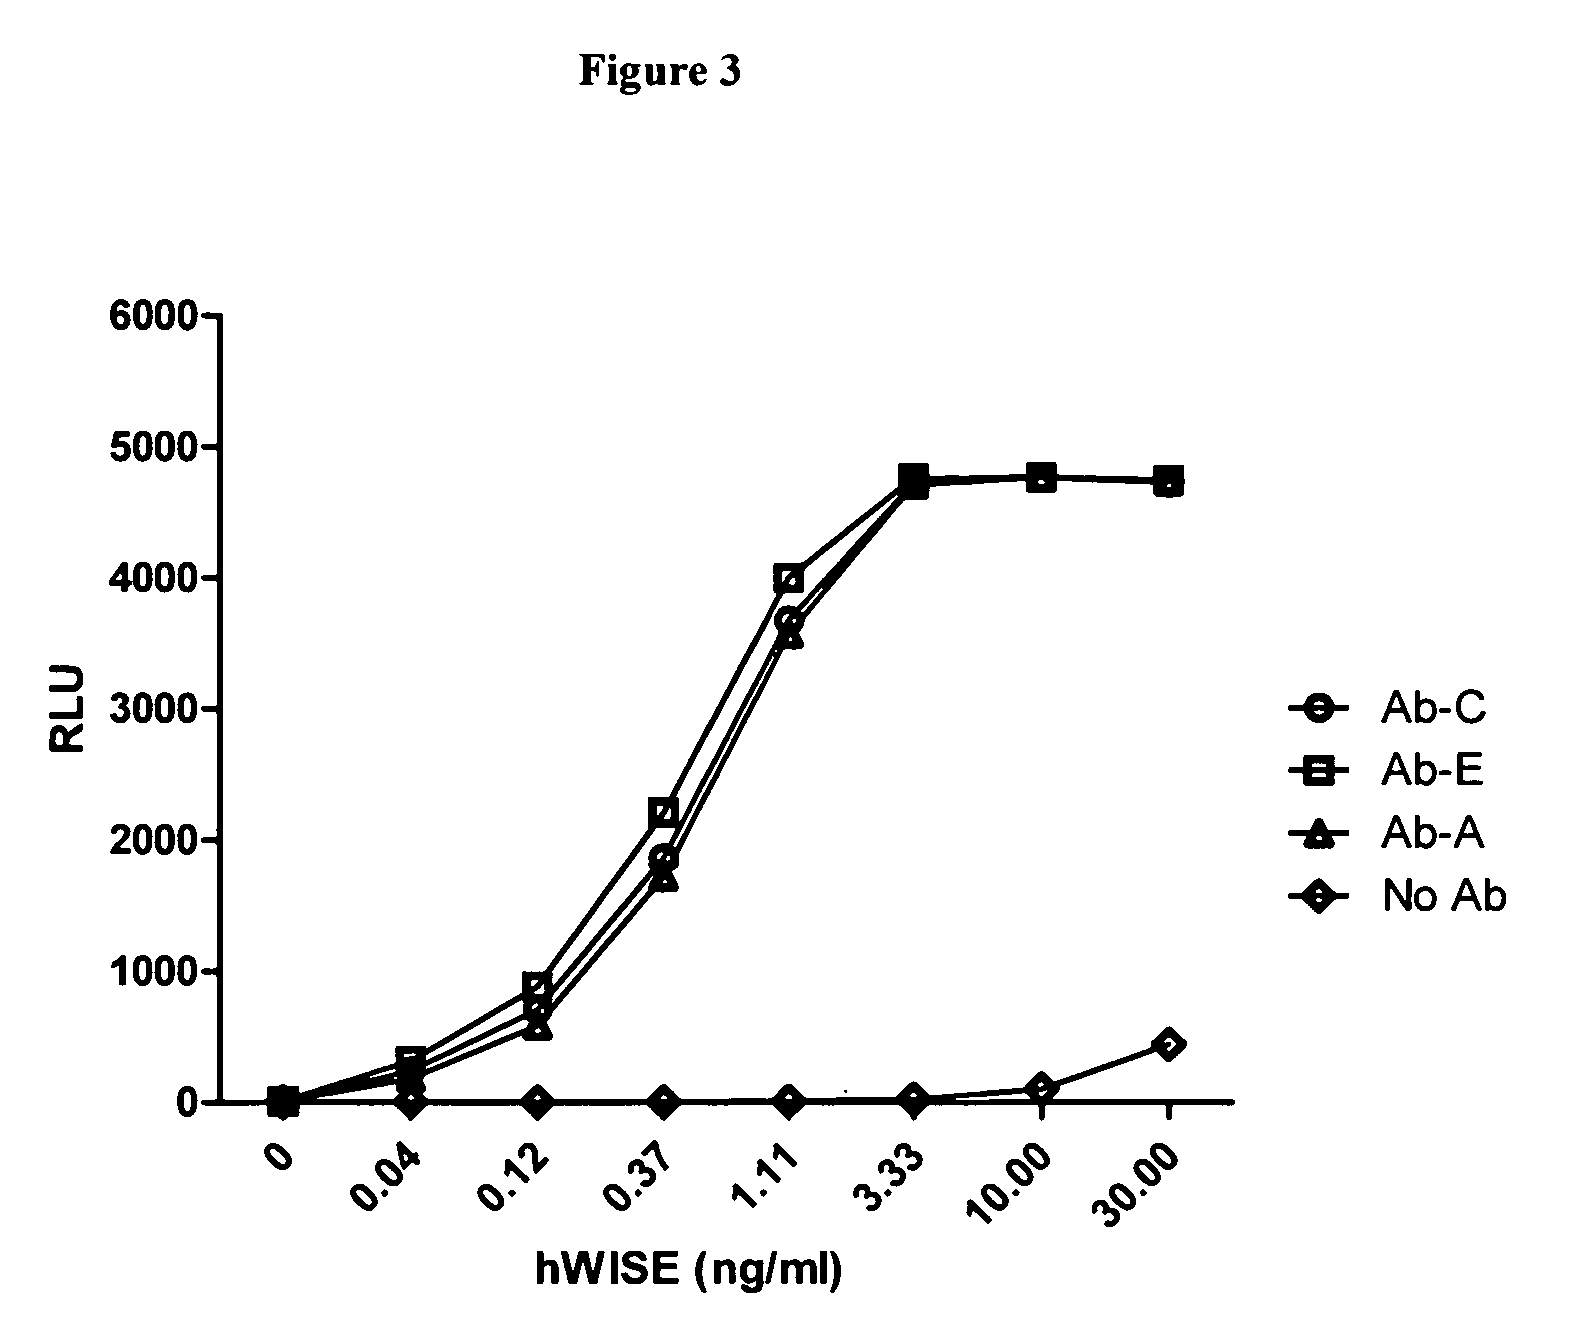 Wise binding agents and epitopes